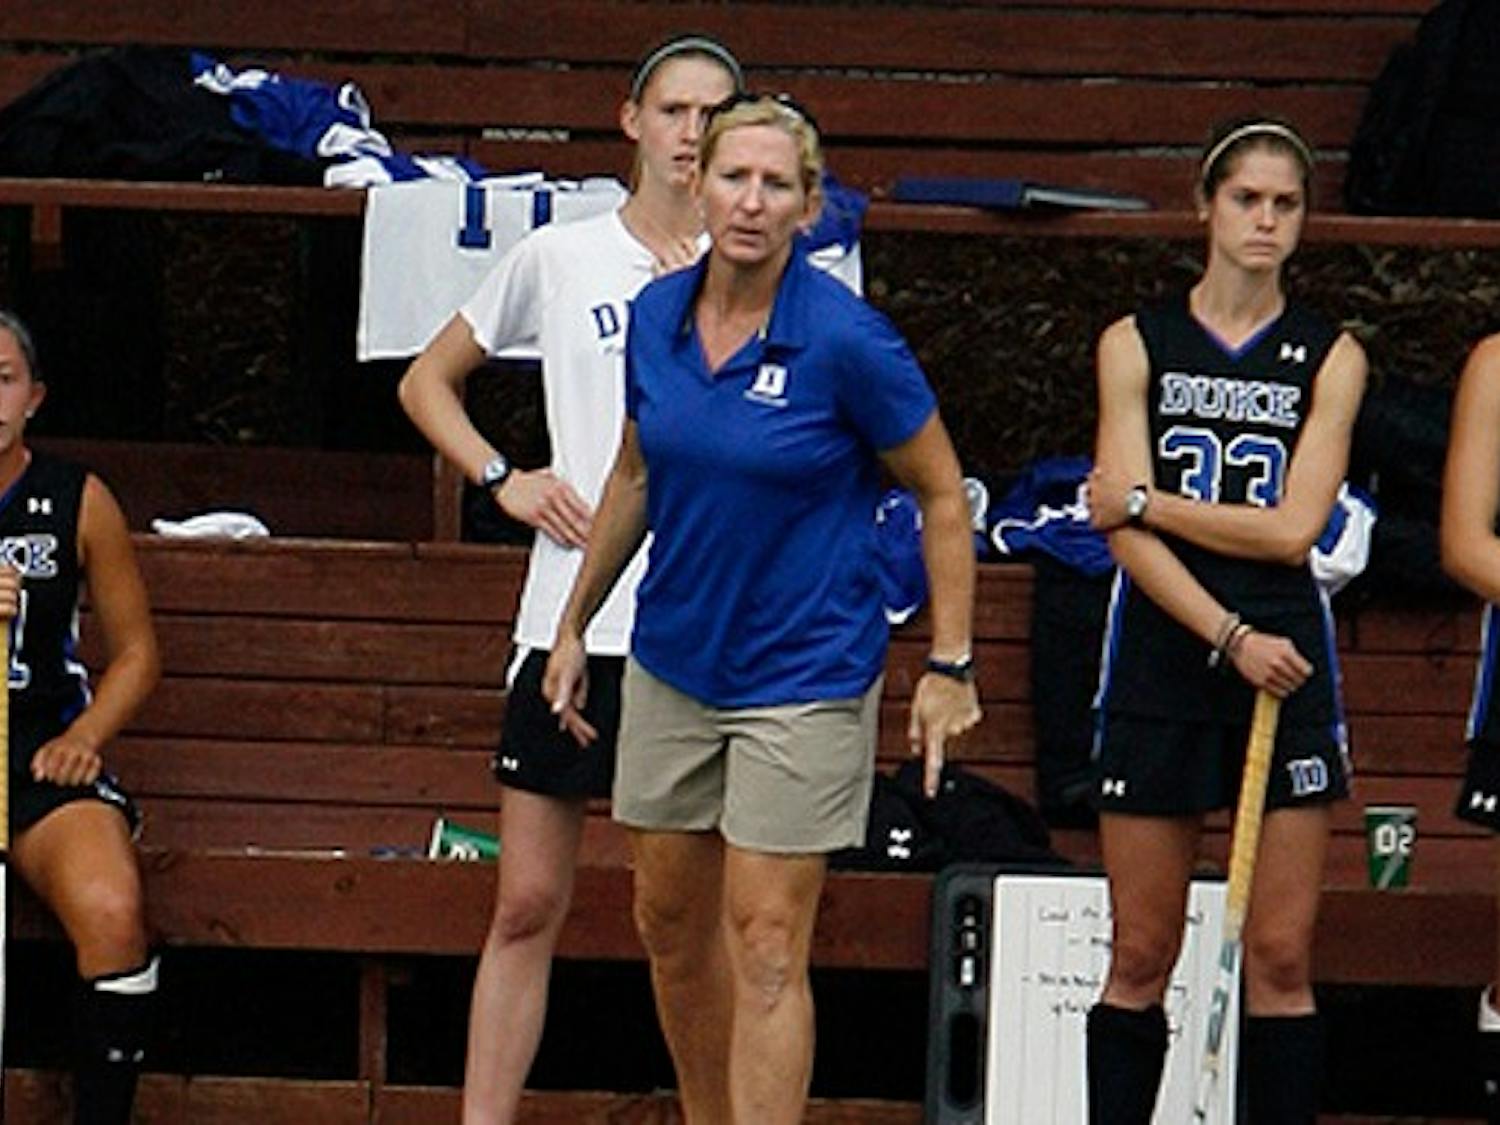 After going just 8-11 in 2010, the Blue Devils bounced back to go 14-8 in Bustin’s inaugural season.